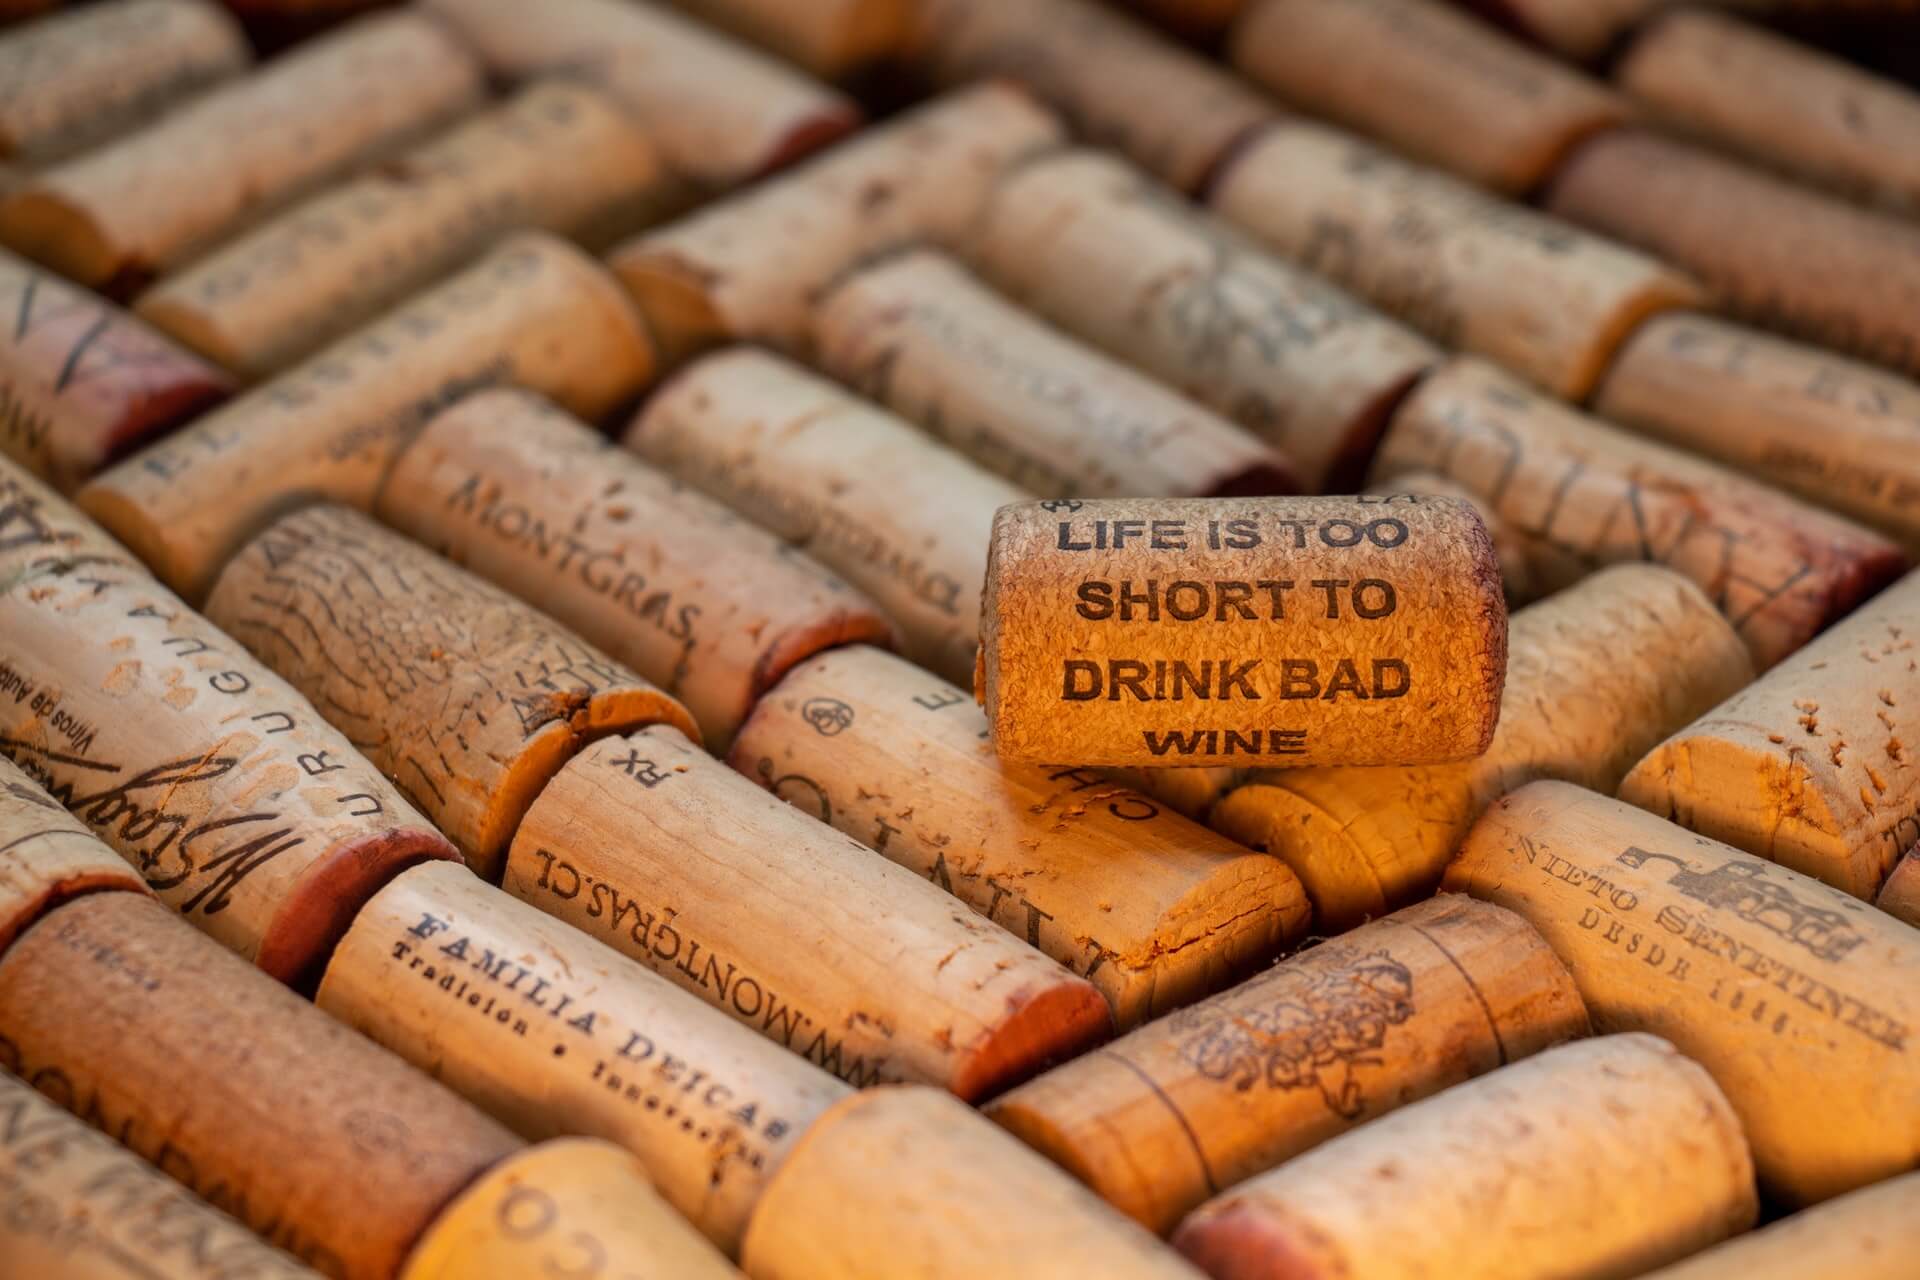 "Life's too short to drink bad wine" cork